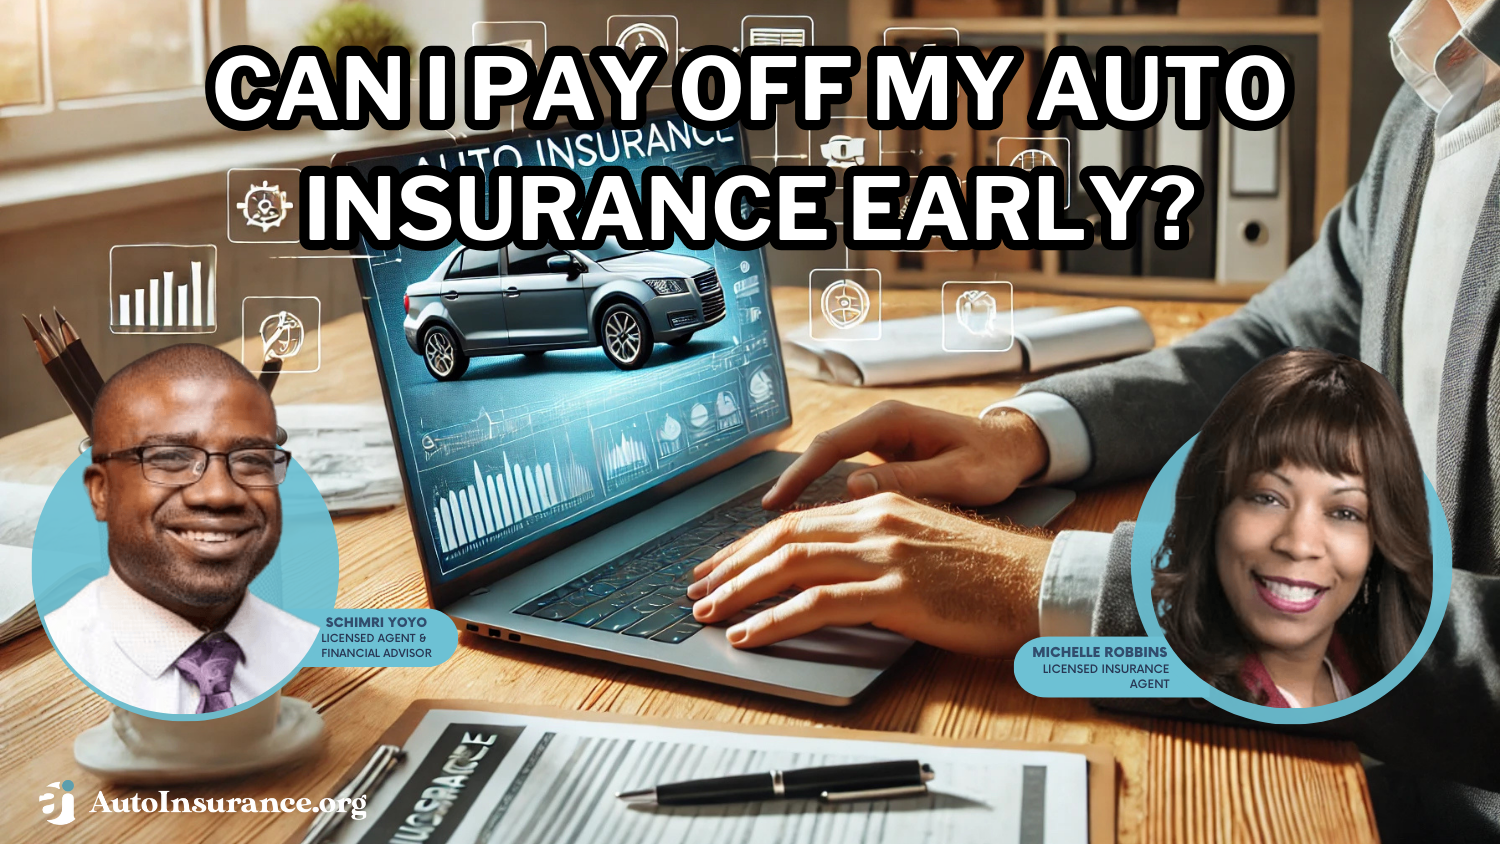 Can I pay off my auto insurance early?